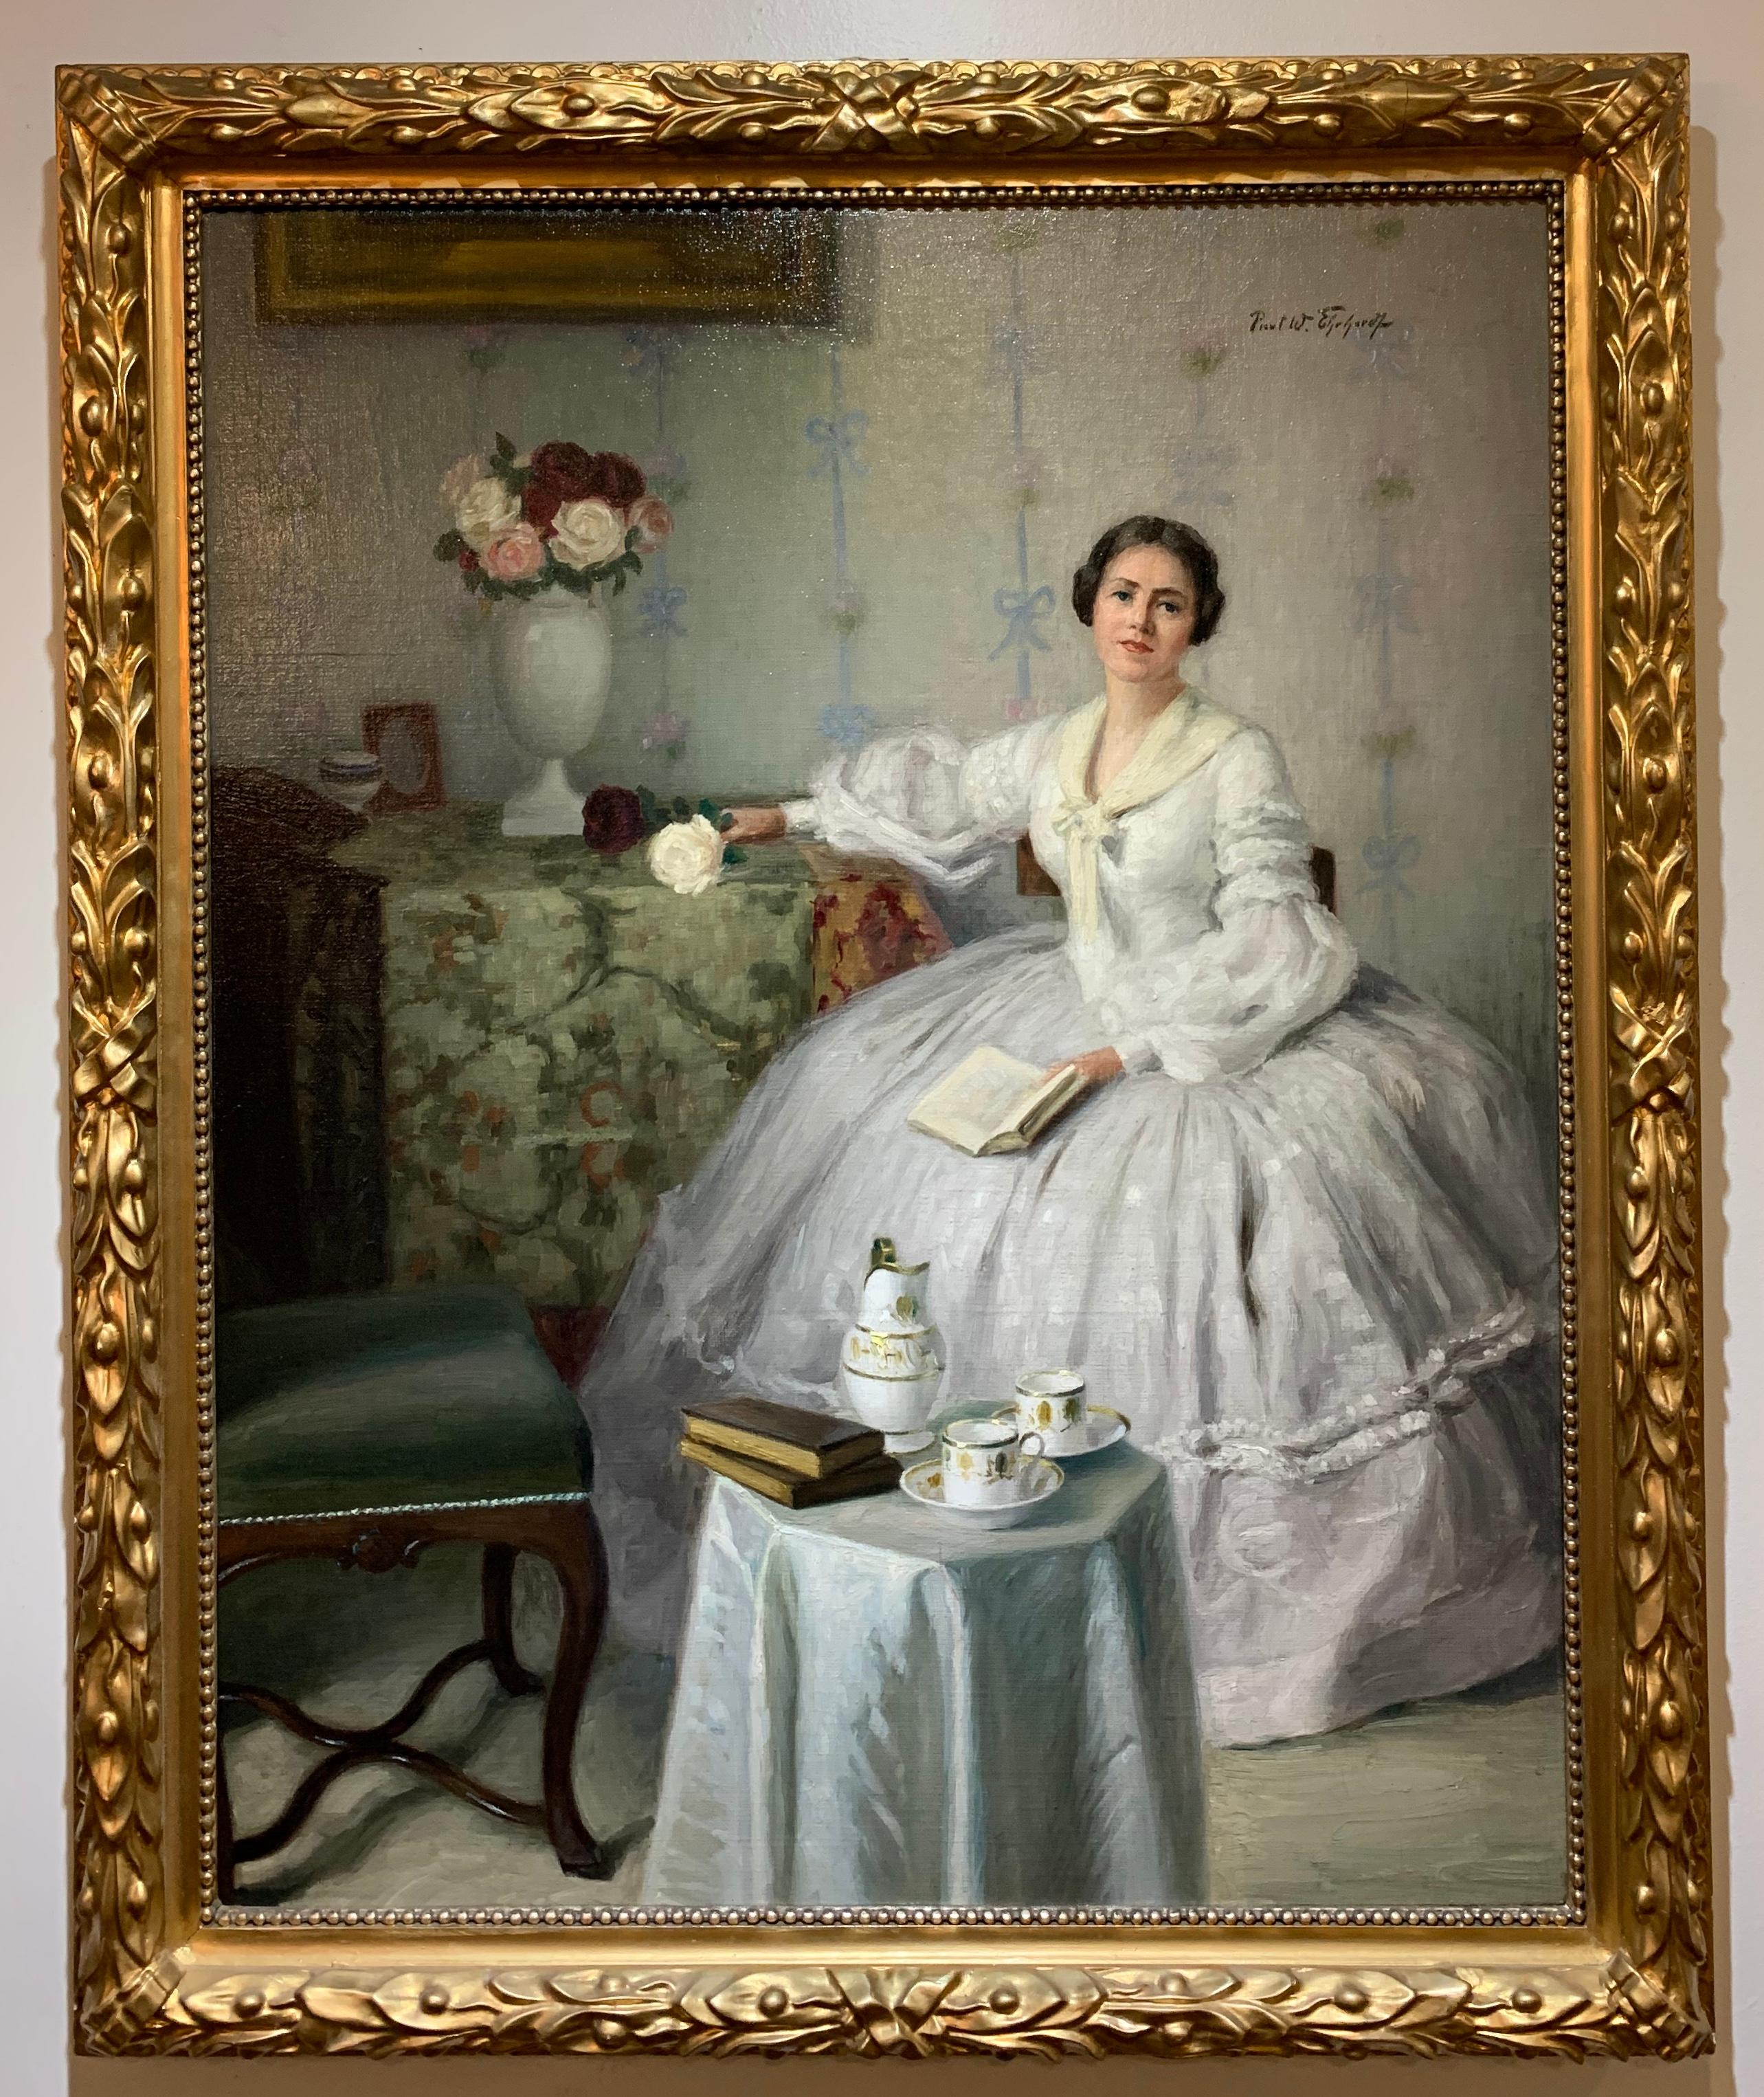 Paul Ehrhardt Portrait Painting - Antique Impressionist Oil Painting of a Woman in a White Dress w/ Roses